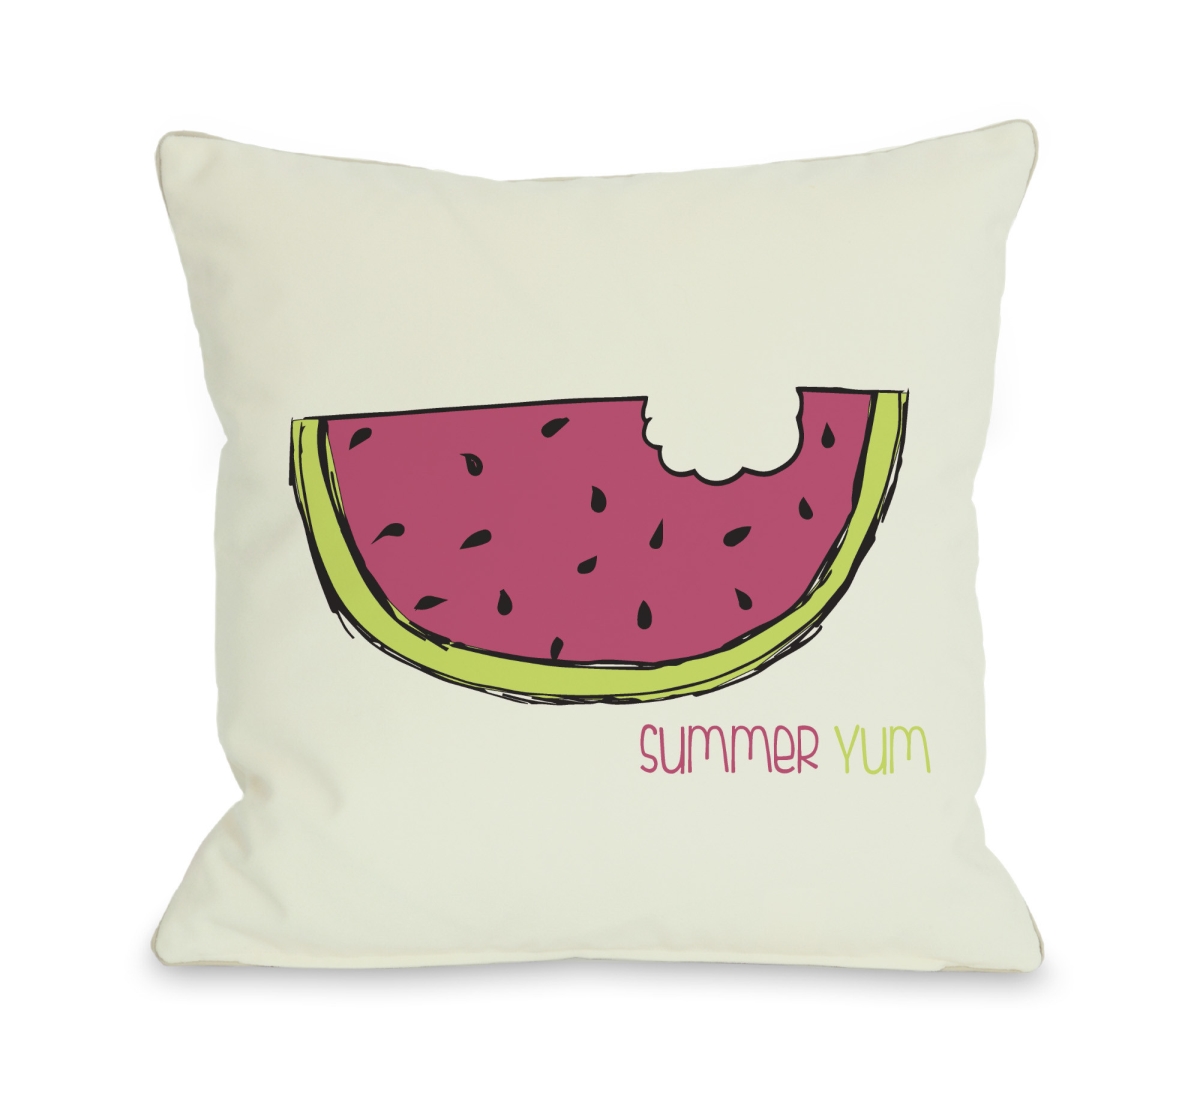 70829pl16o 16 X 16 In. Summer Yum Watermelon Pillow Outdoor